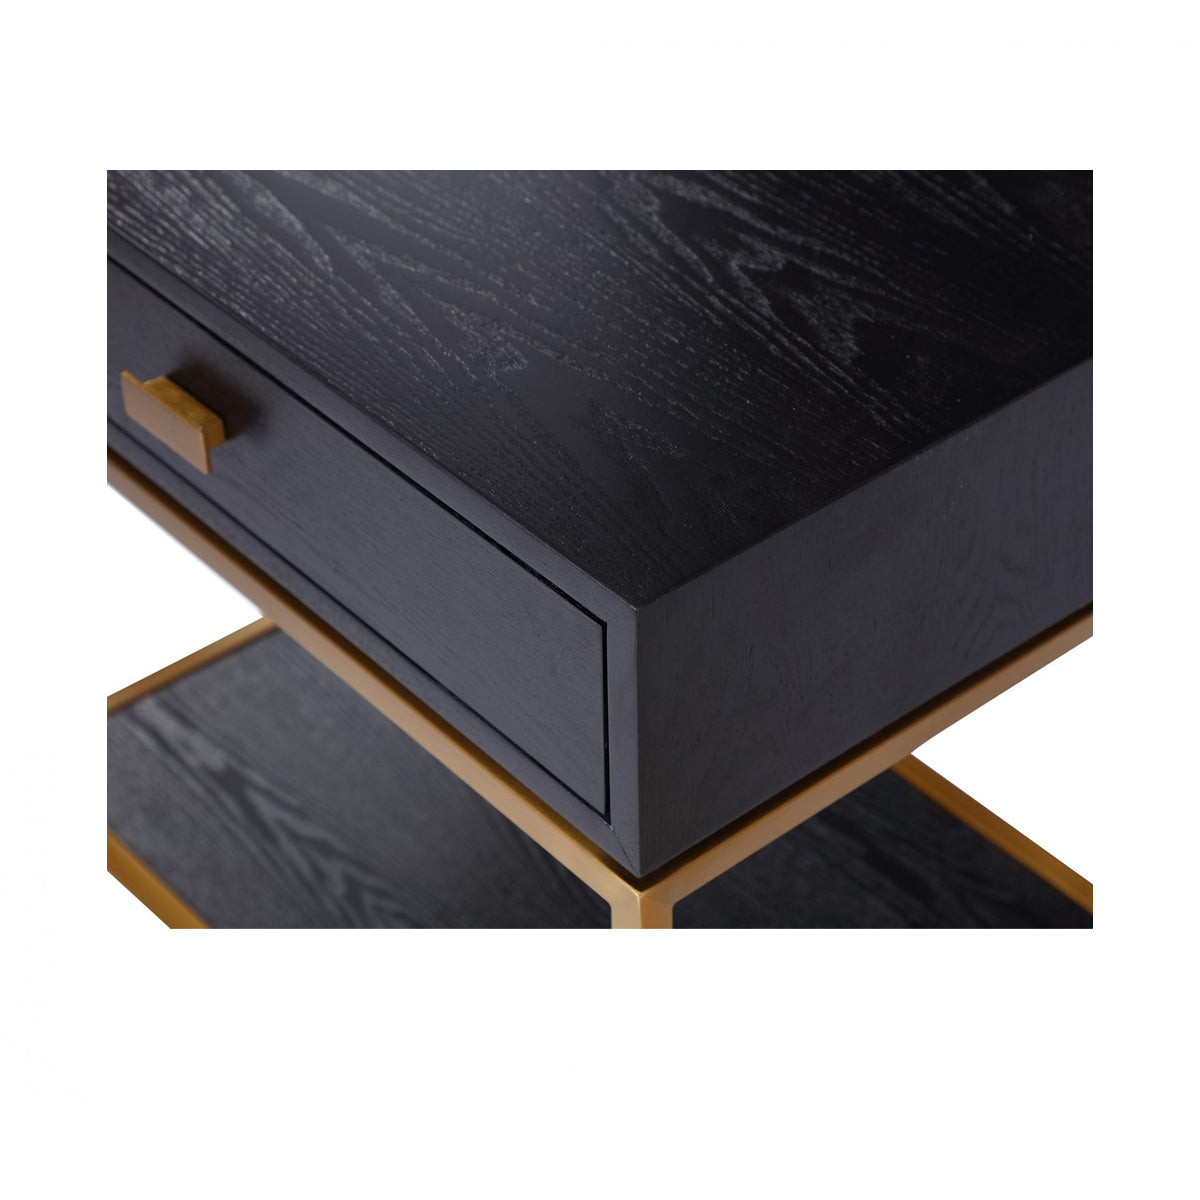 Liang & Eimil Levi Gold & Wenge Bedside Table